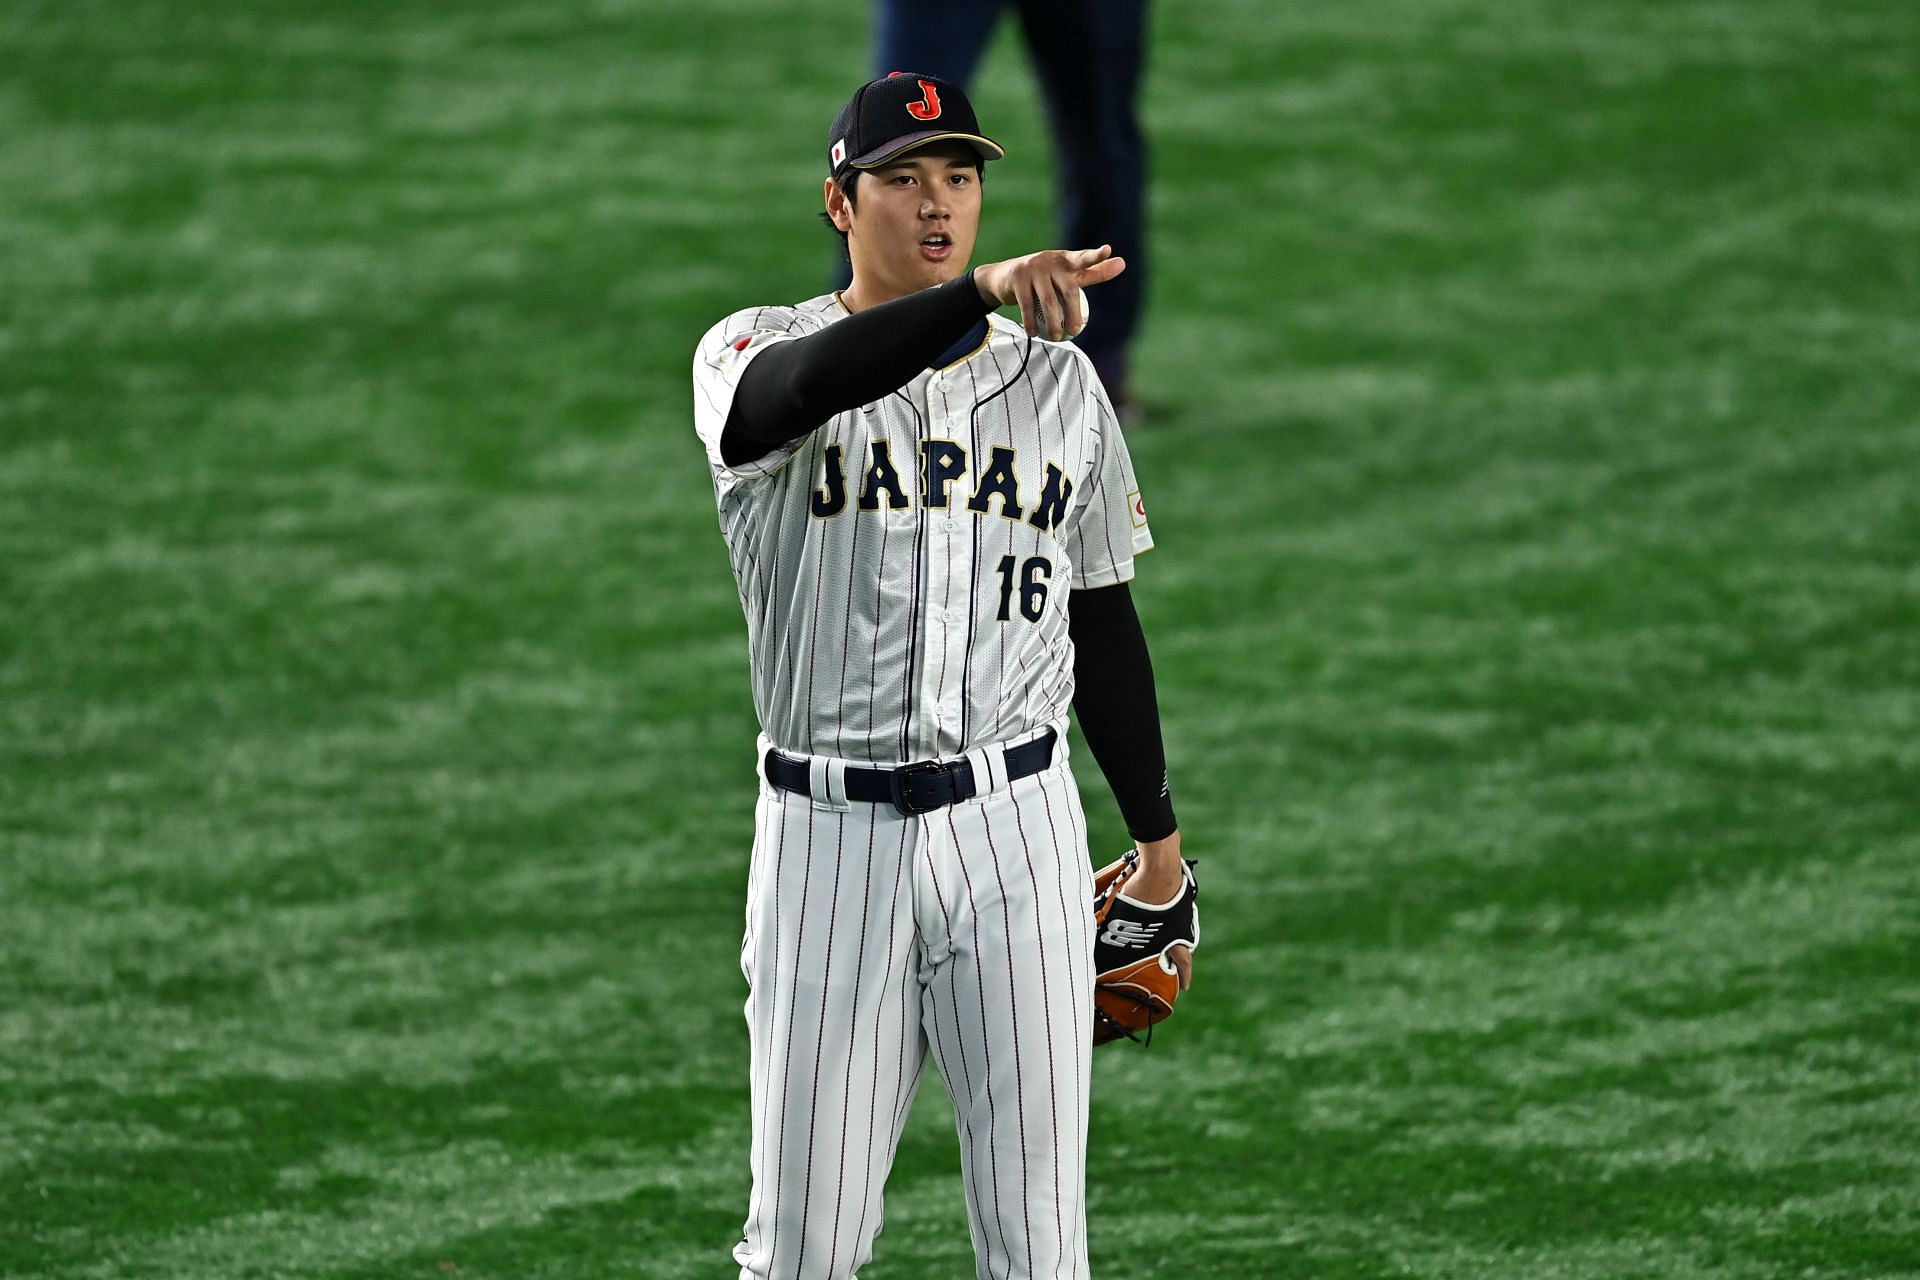 Japanese star Shohei Ohtani to face Australia 's best in 'once-in